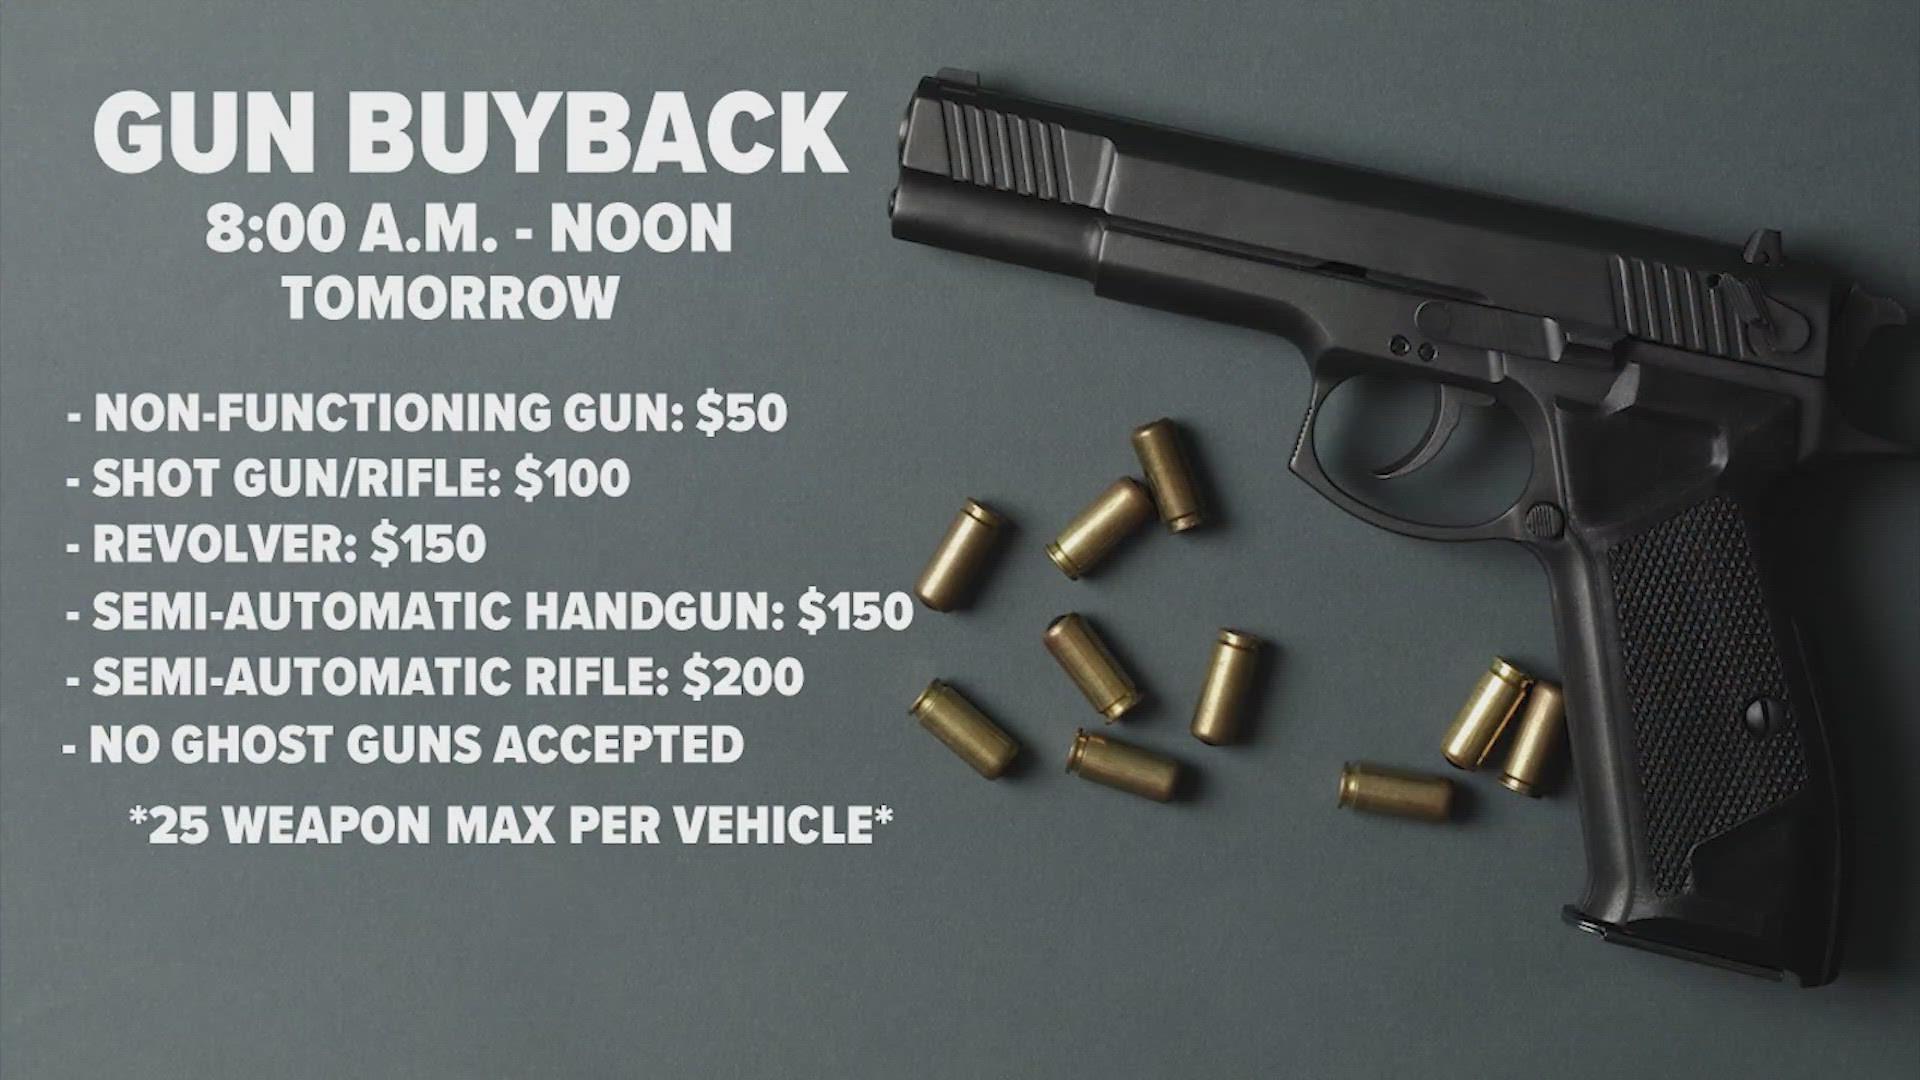 The gun buyback event is happening on June 10 at NRG Park. The goal of this event is to get guns off the streets.